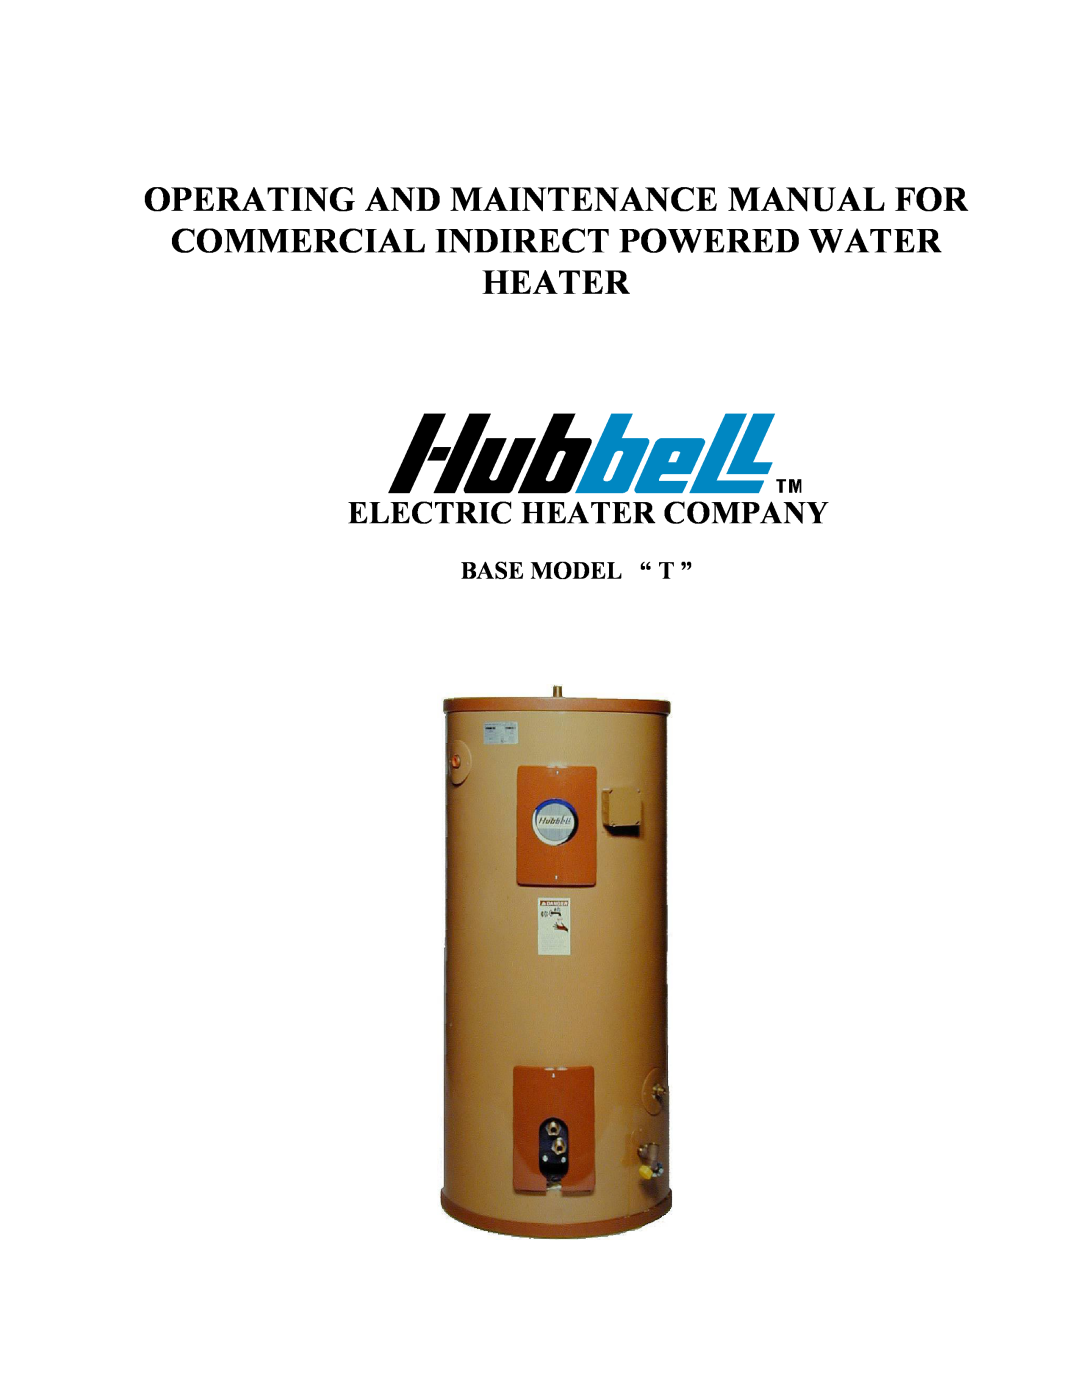 Hubbell Electric Heater Company manual Base Model “ T ”, Electric Heater Company 